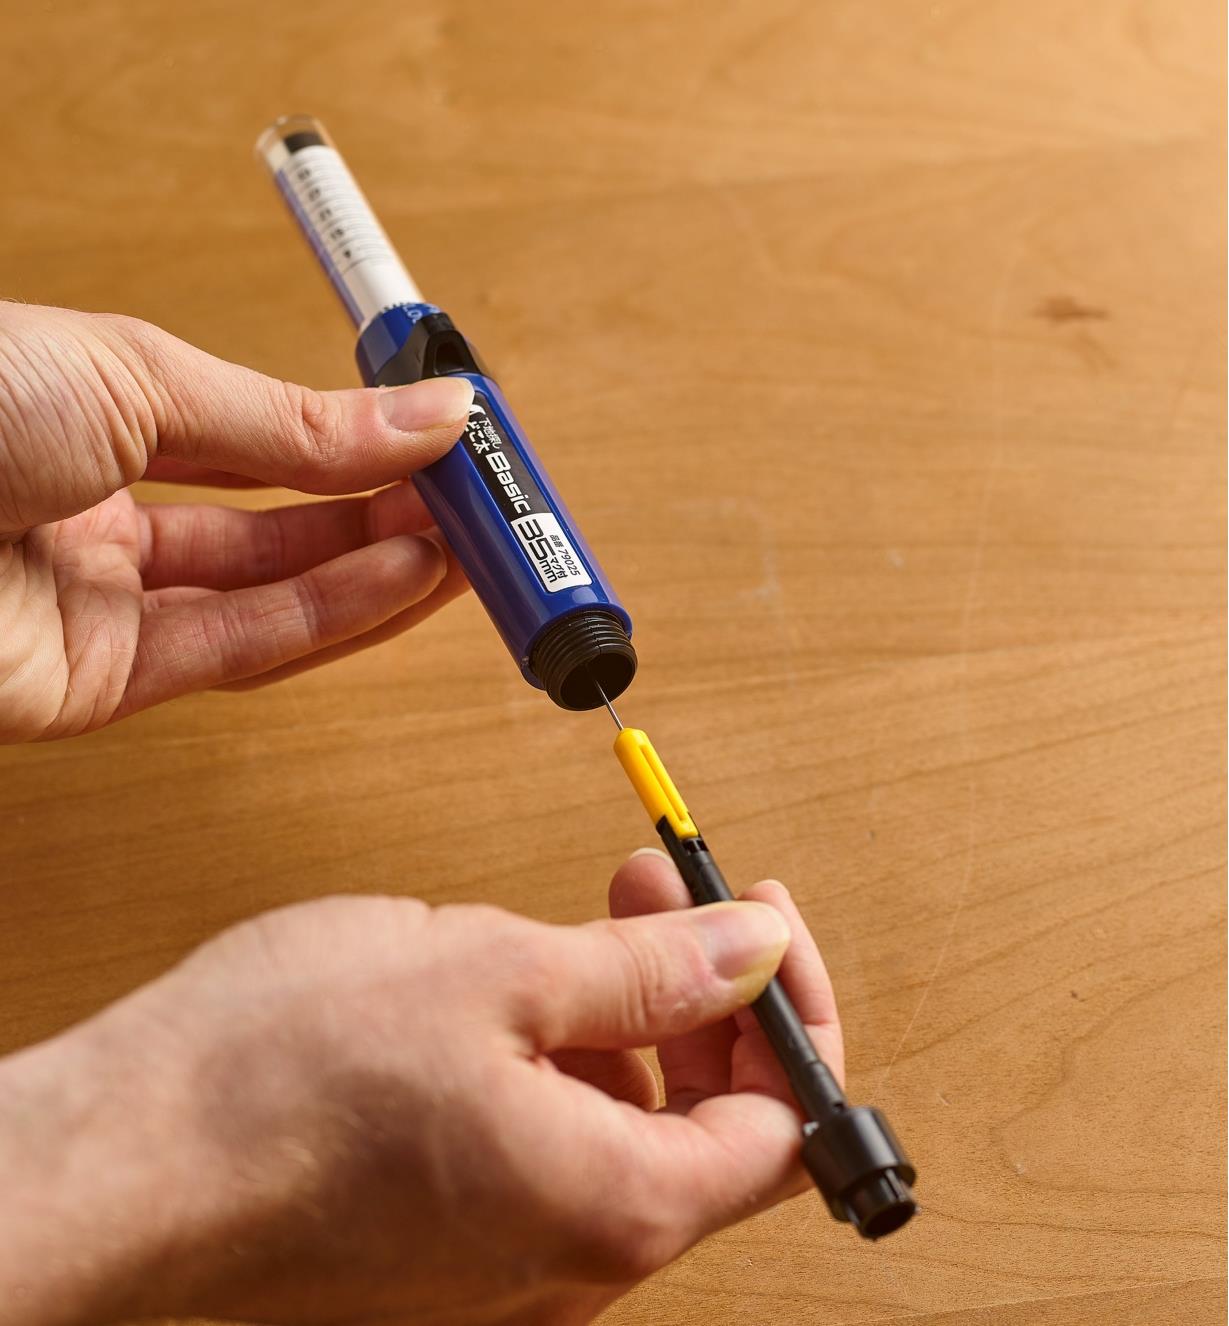 Inserting a base, holder and needle into a stud finder